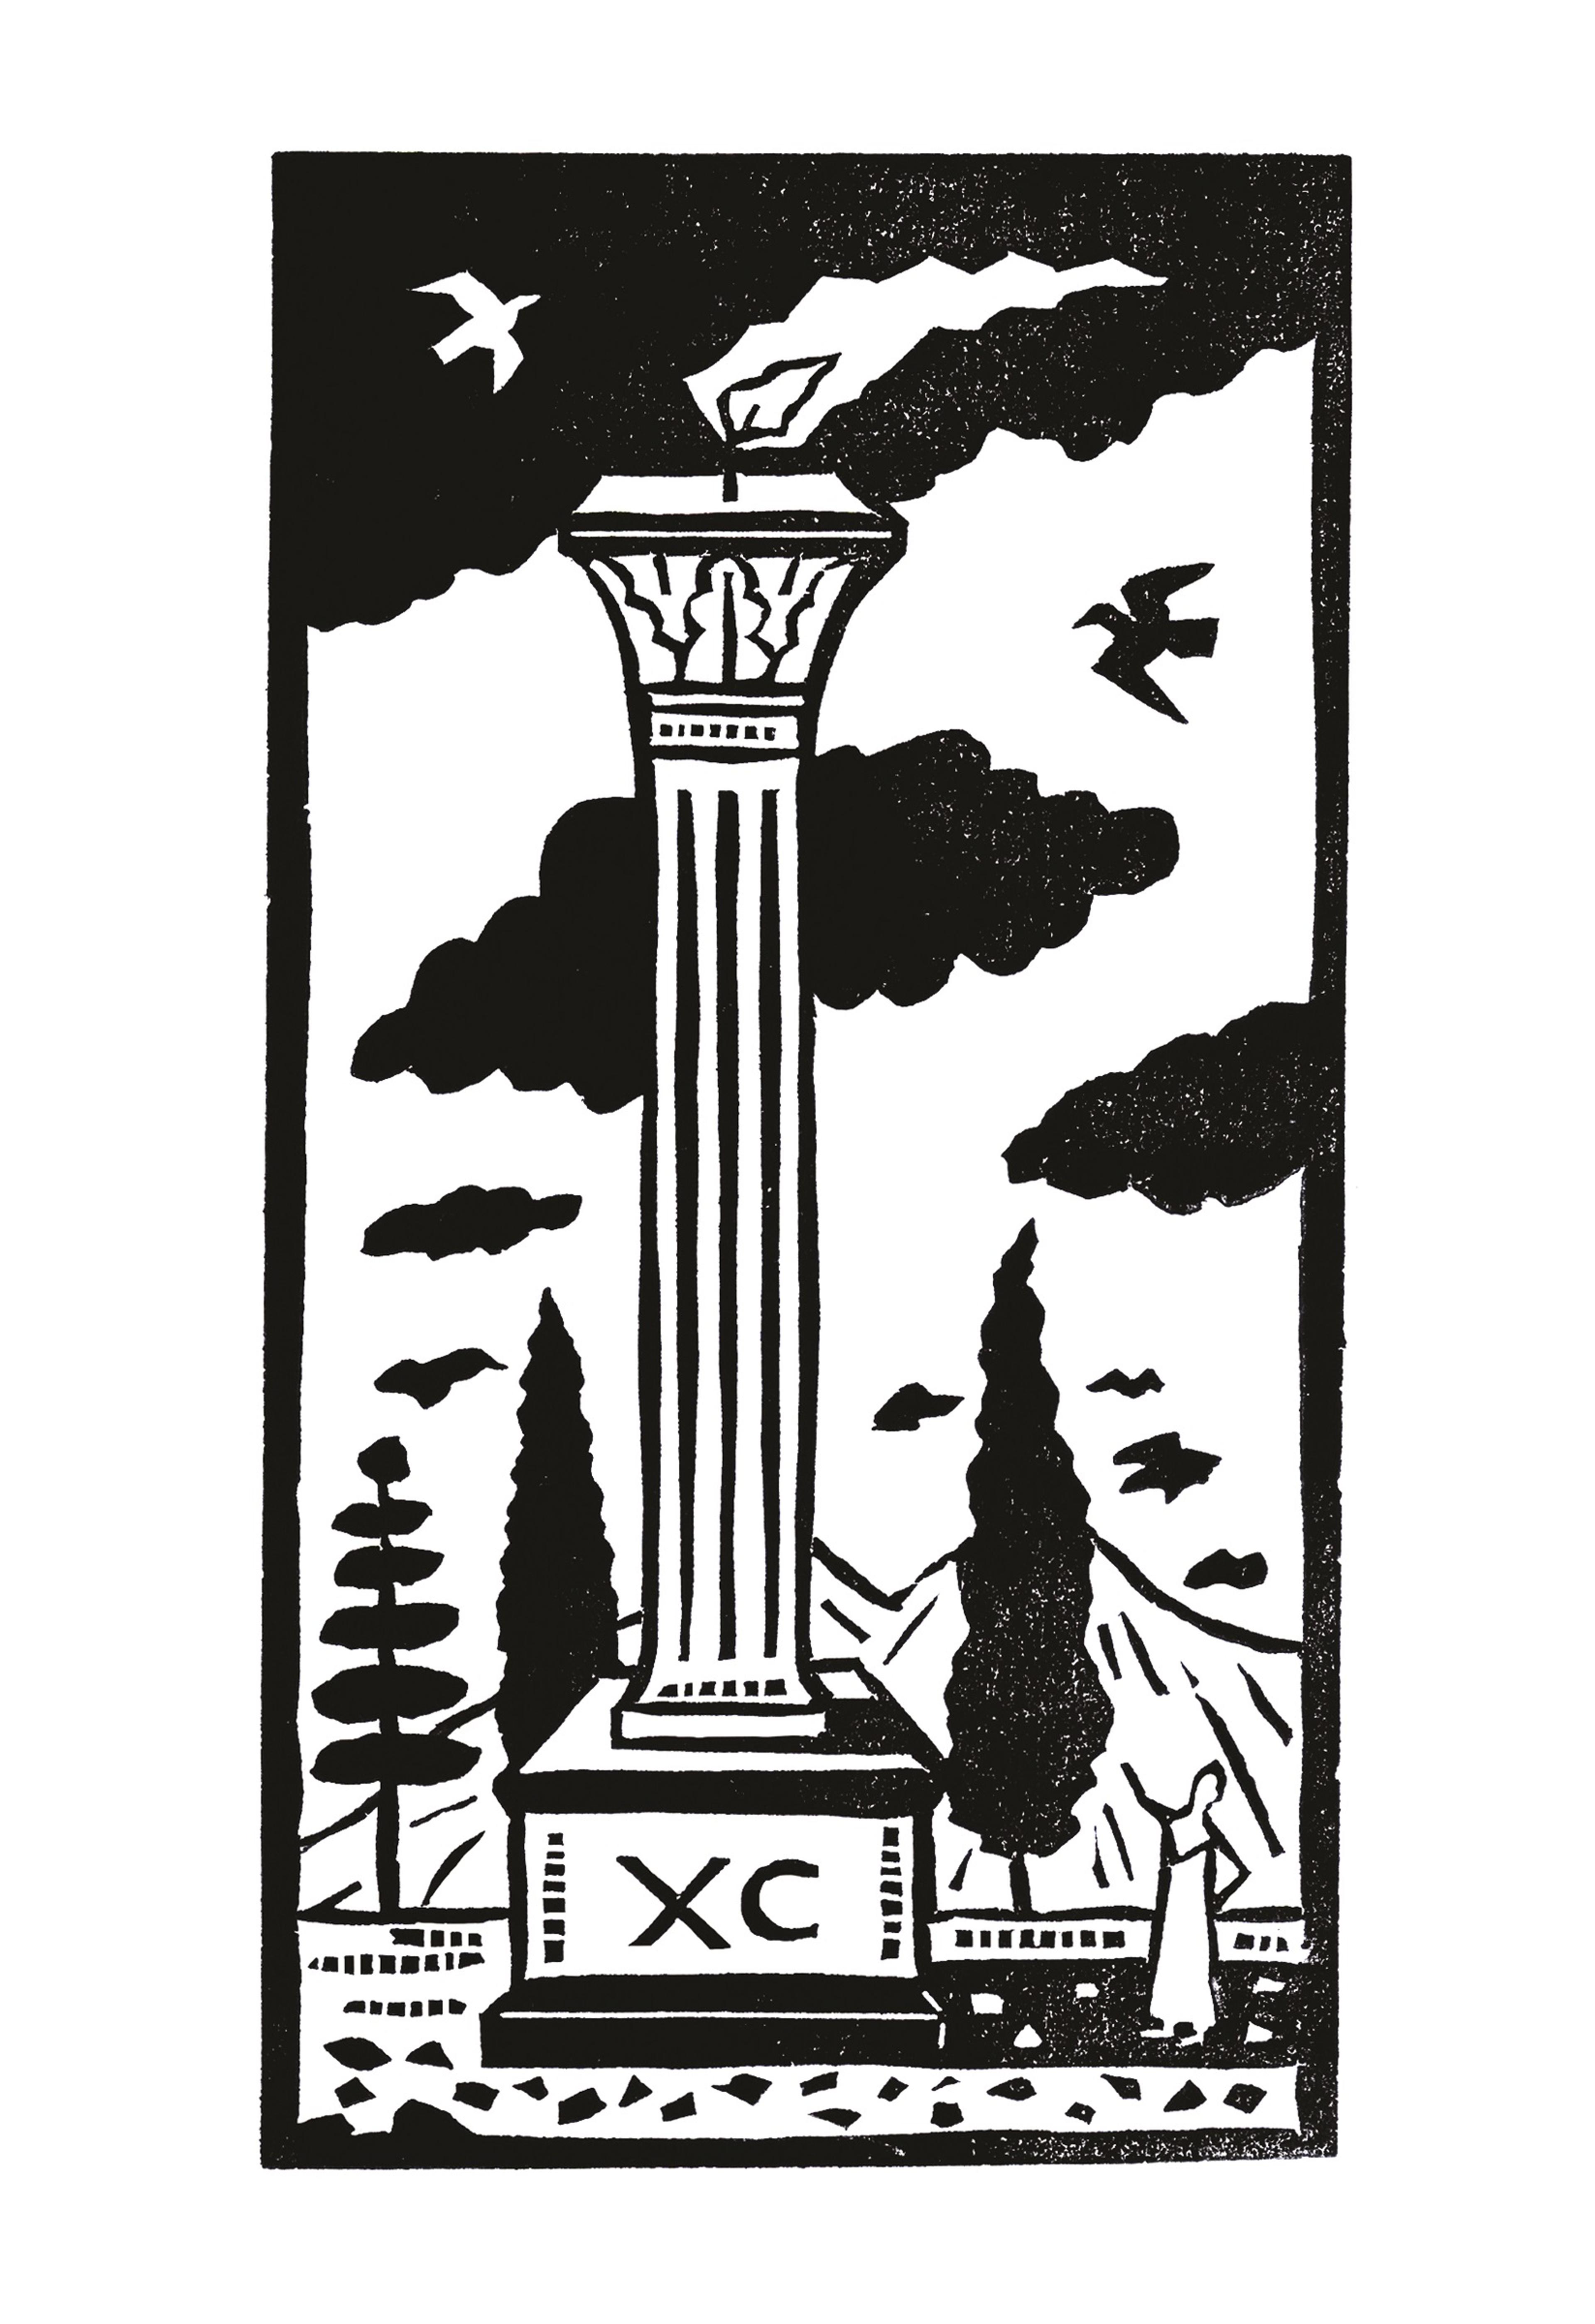 Woodcut illustration of a tall column with a candle wick on top